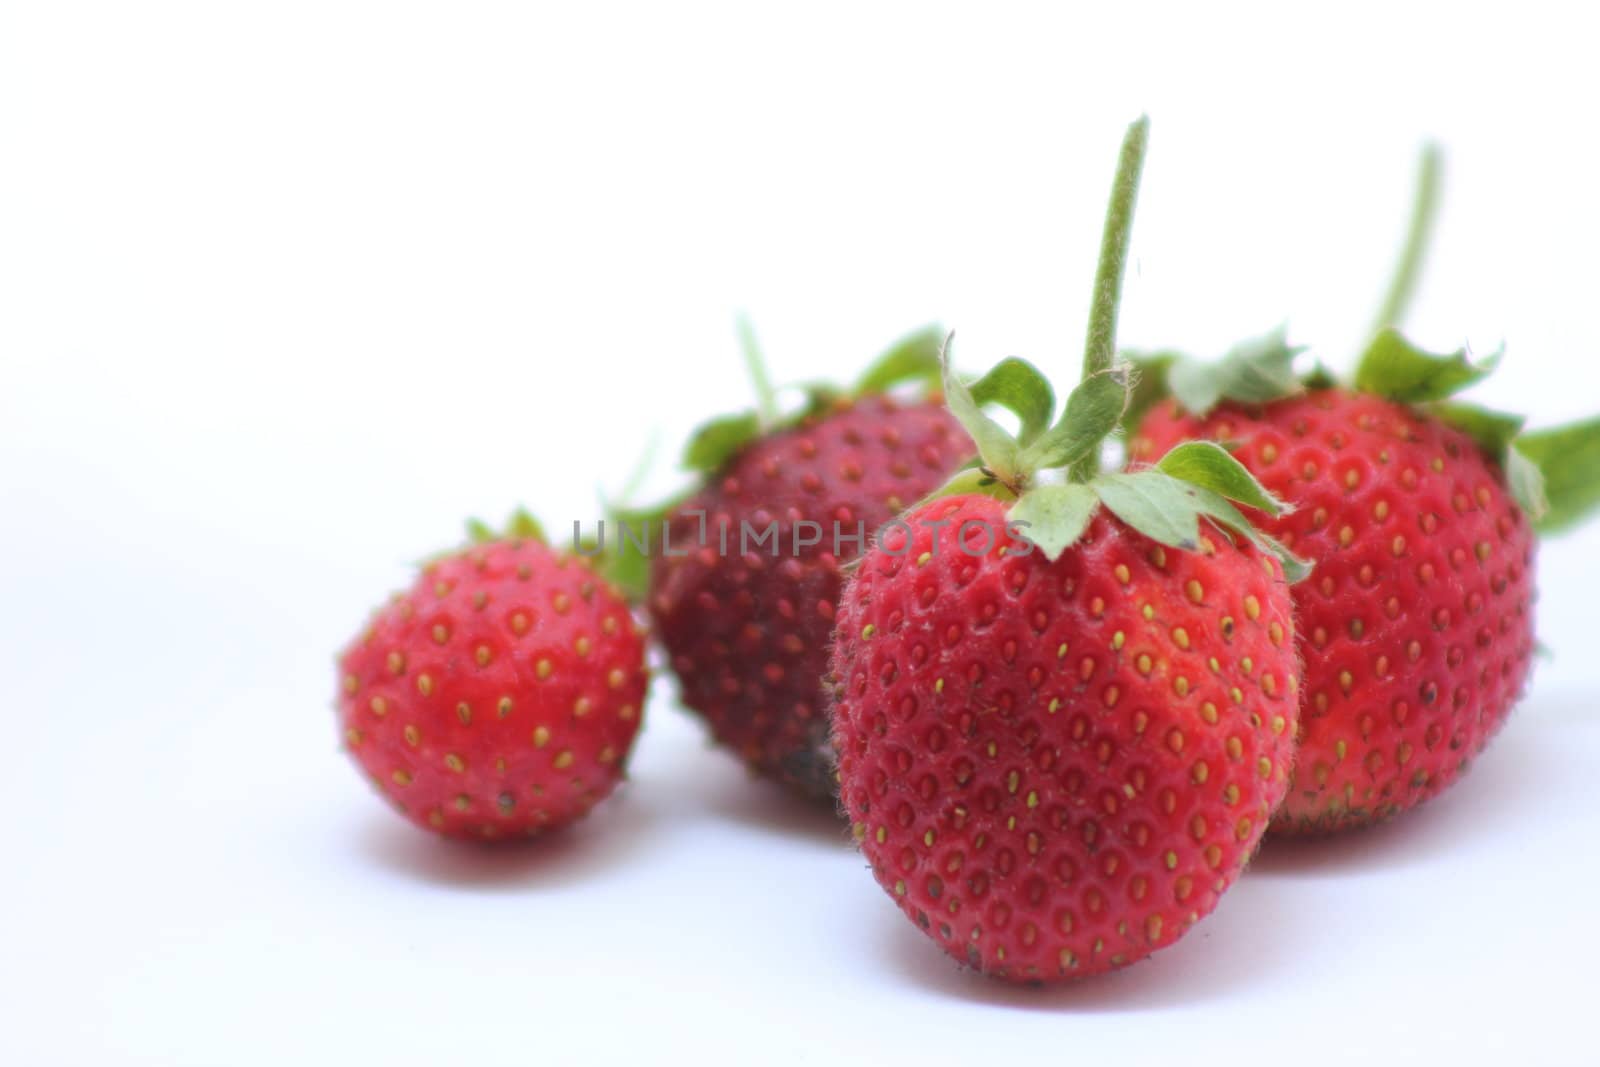 Strawberries grouped together with stems attached.